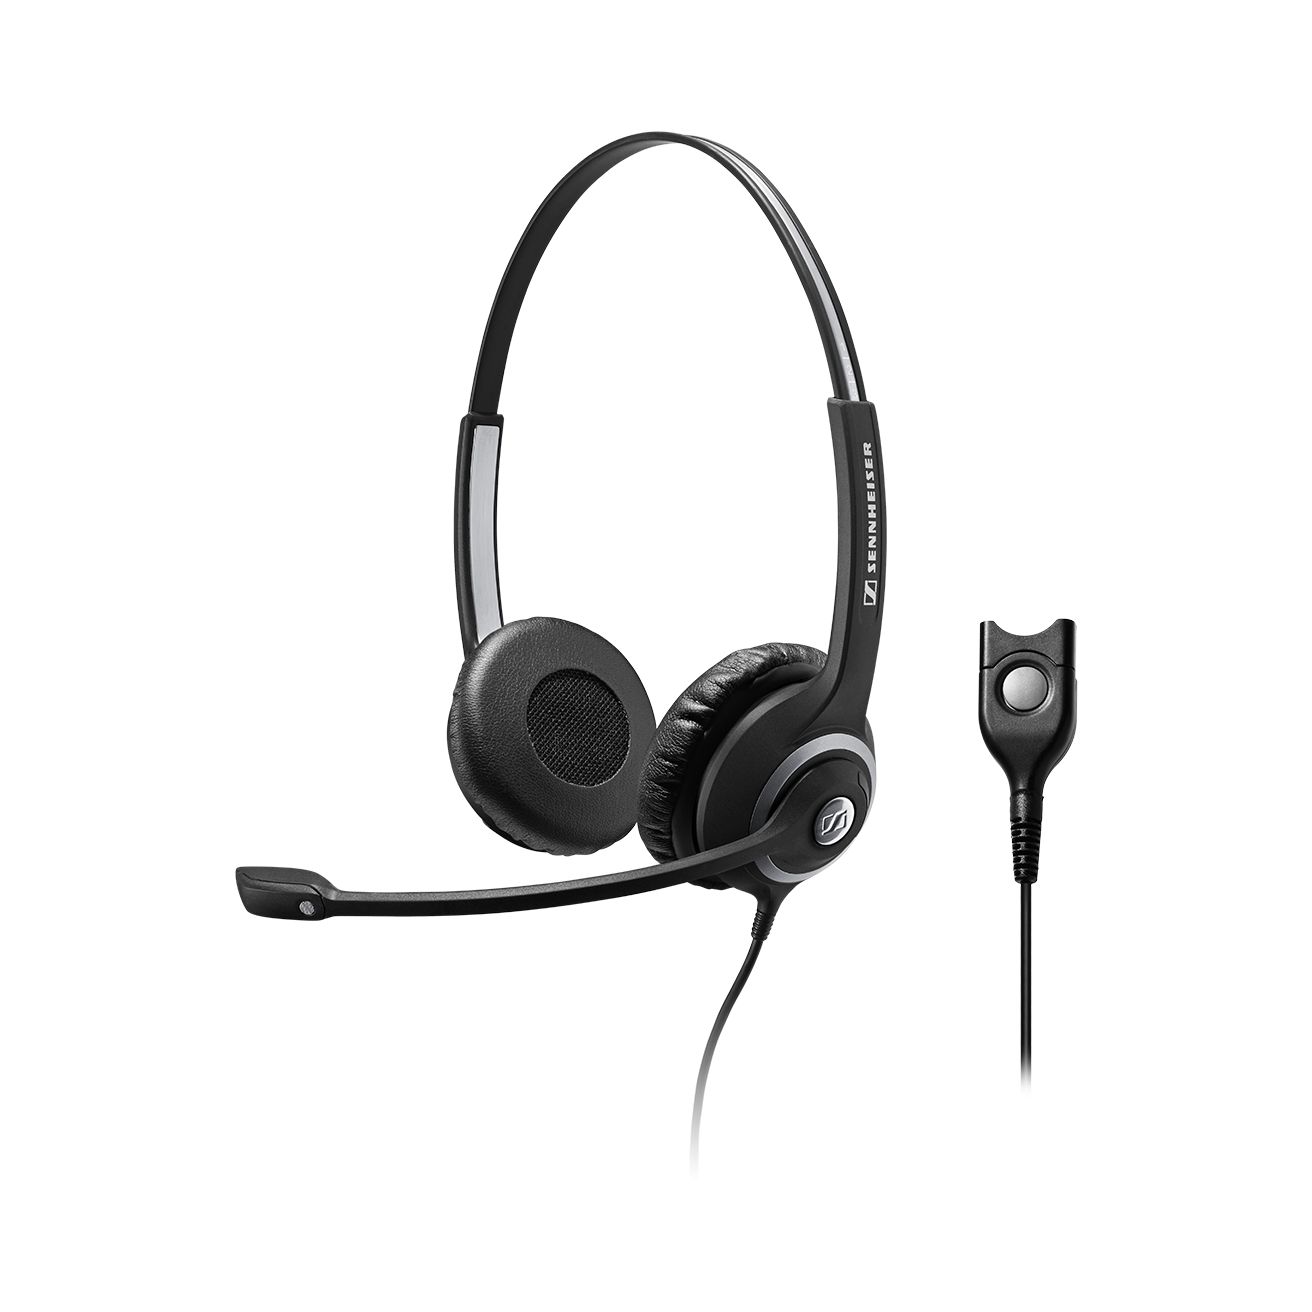 Sennheiser SC 260 Wide Band Binaural headset with Noise Cancelling mic - high impedance for standard phones, Easy Disconnect